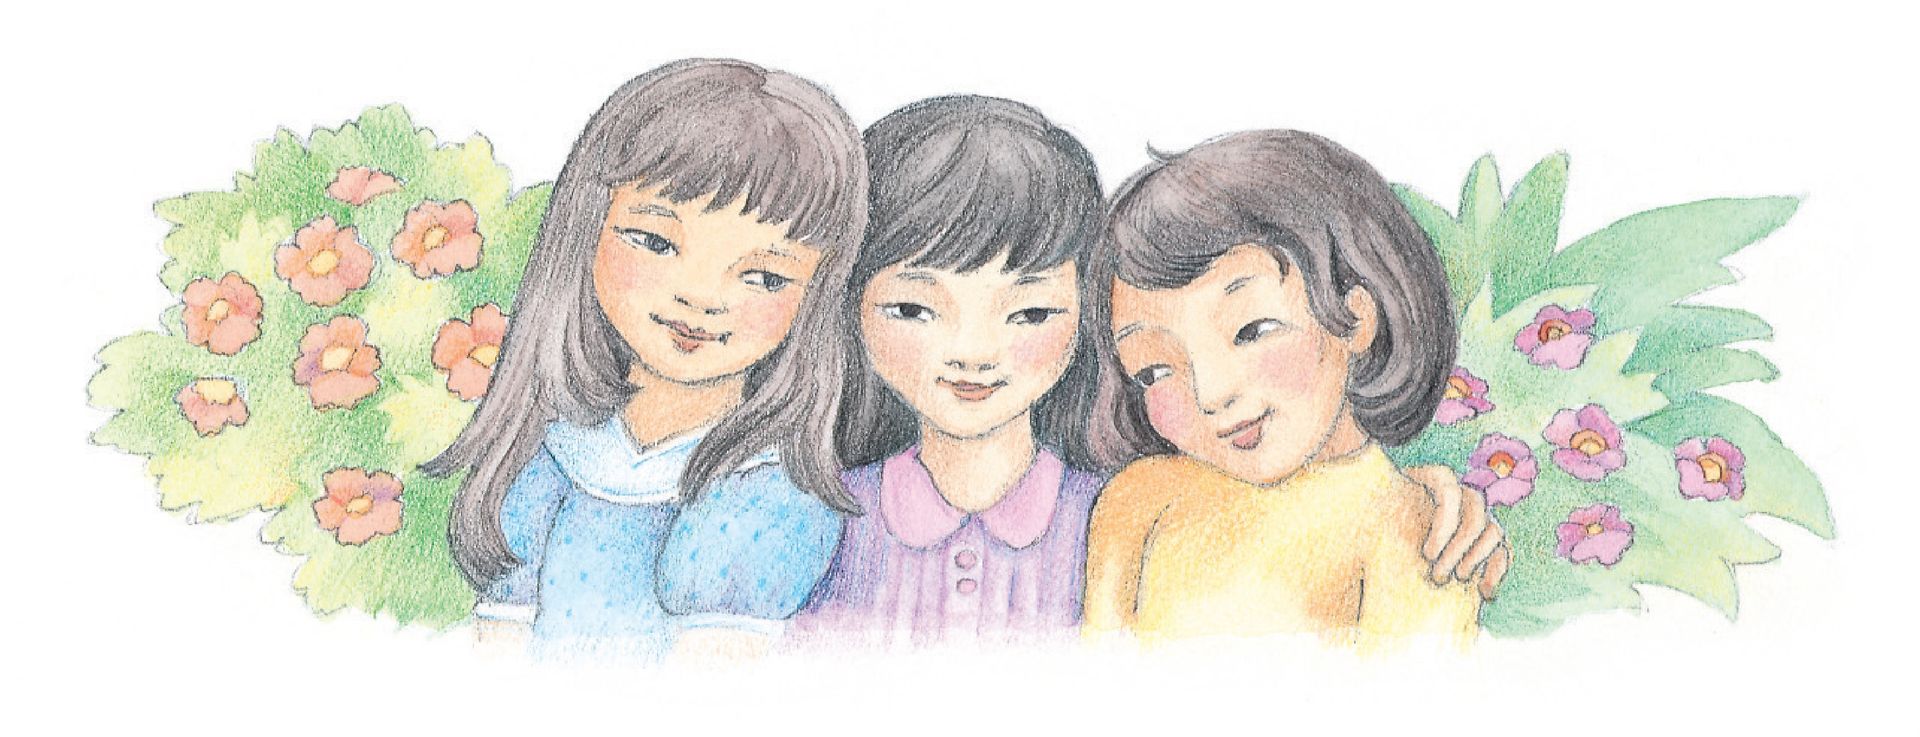 Three girls standing together. From the Children’s Songbook, page 7, “I Thank Thee, Dear Father”; watercolor illustration by Phyllis Luch.